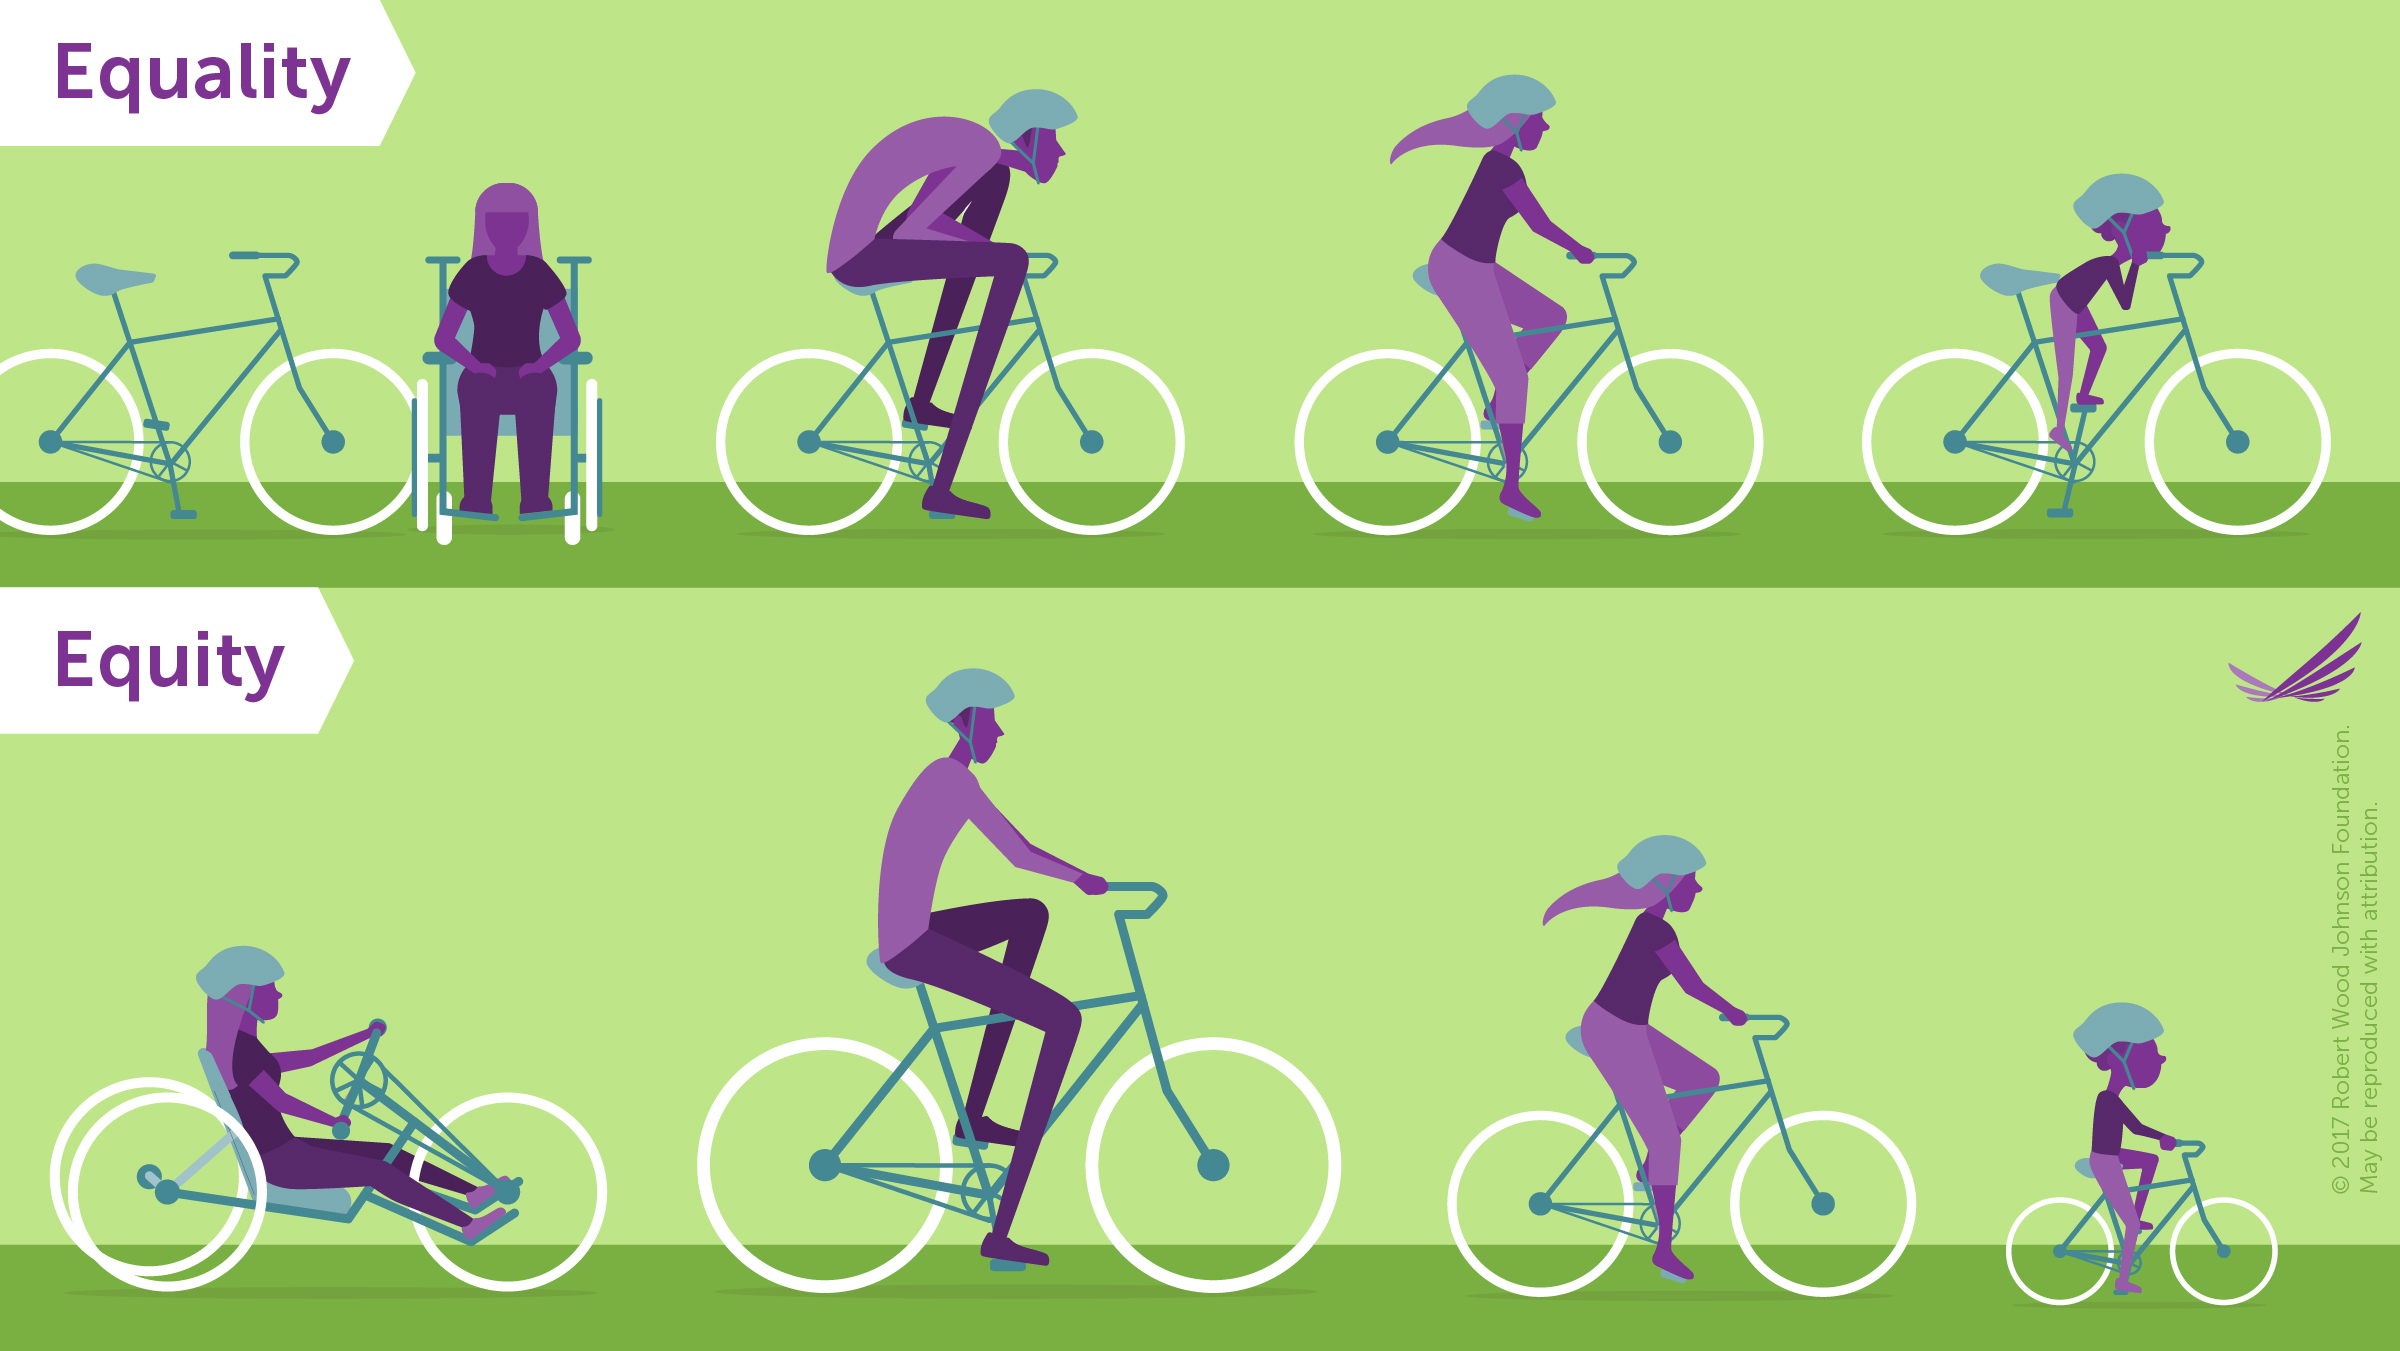 Figure 2. Equality vs Equity (from the Robert Wood Johnson Foundation). This graphic depicts how providing different levels of aid based on a person’s needs will result in a more equal outcome. This image shows on the top a person in a wheelchair next to a bike, a tall person hunched over riding the same size bike, a person with long hair comfortably riding the same size bike, and a small child riding the same too large bike. This demonstrates equality. The bottom image depicts the same person from the wheelchair riding a hand powered bike, the tall person riding an appropriate sized bike, the person with long hair sitll on the bike from the previous depictions, and a child on an appropriate sized child bike. This shows equity. 